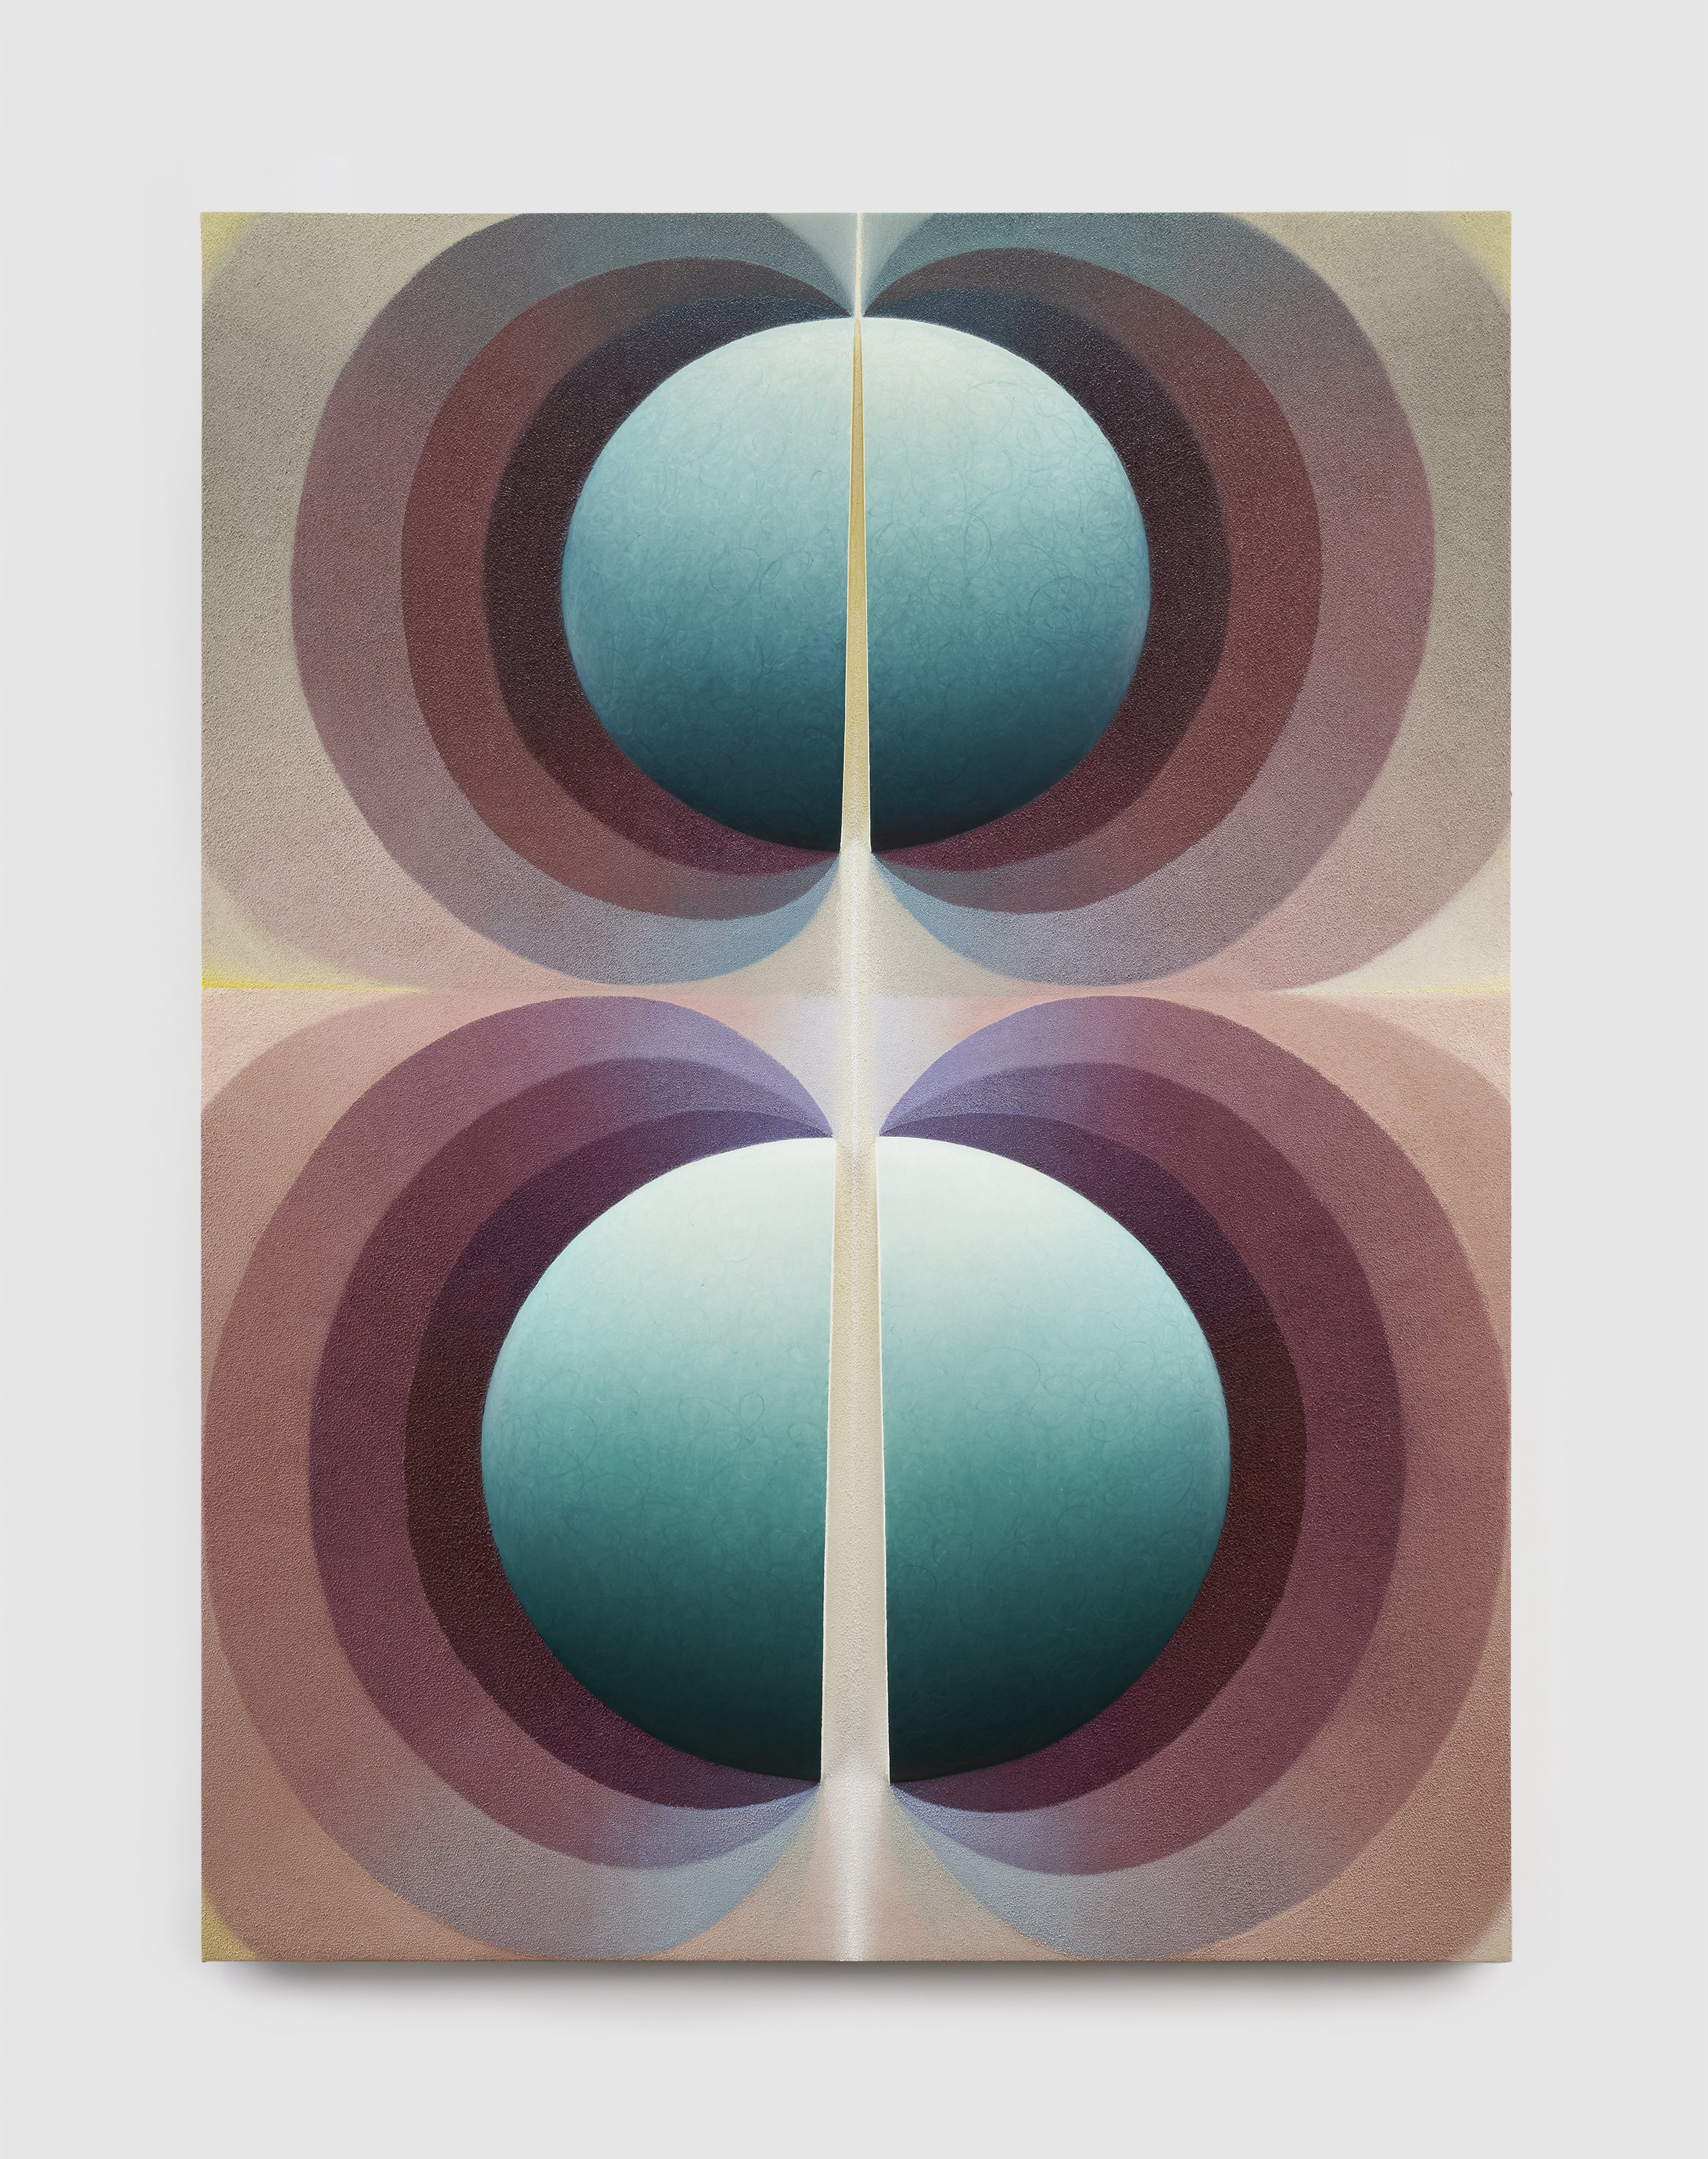 Split orbs in mauve, yellow and teal